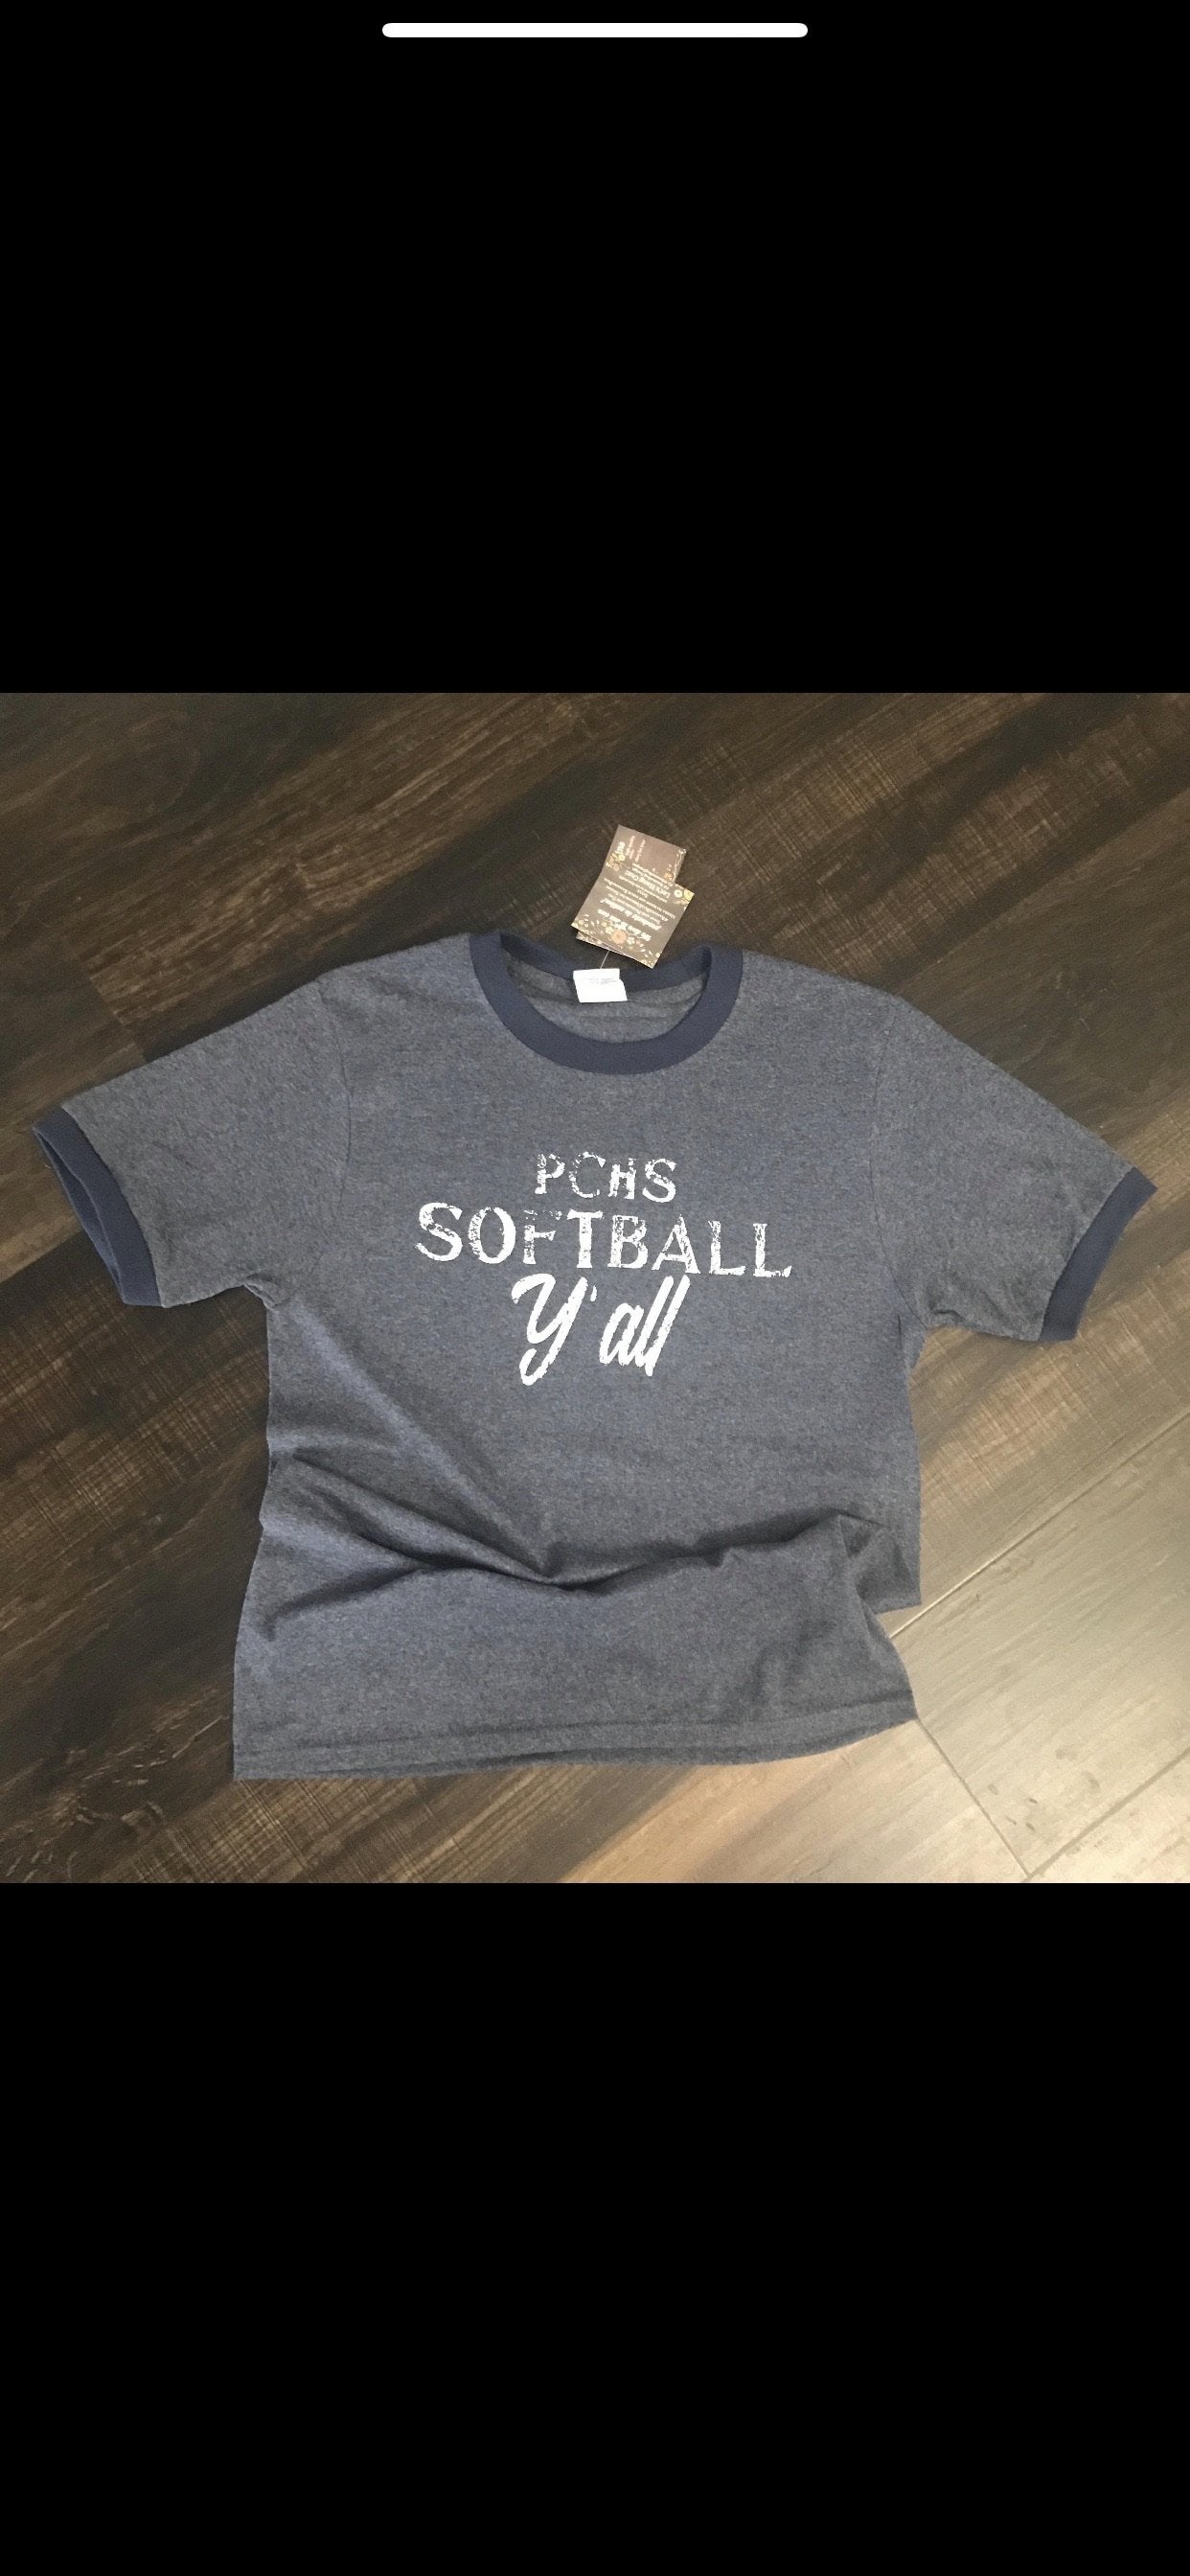 PCHS Softball Y'all Shirts - The Teal Turtle Clothing Company